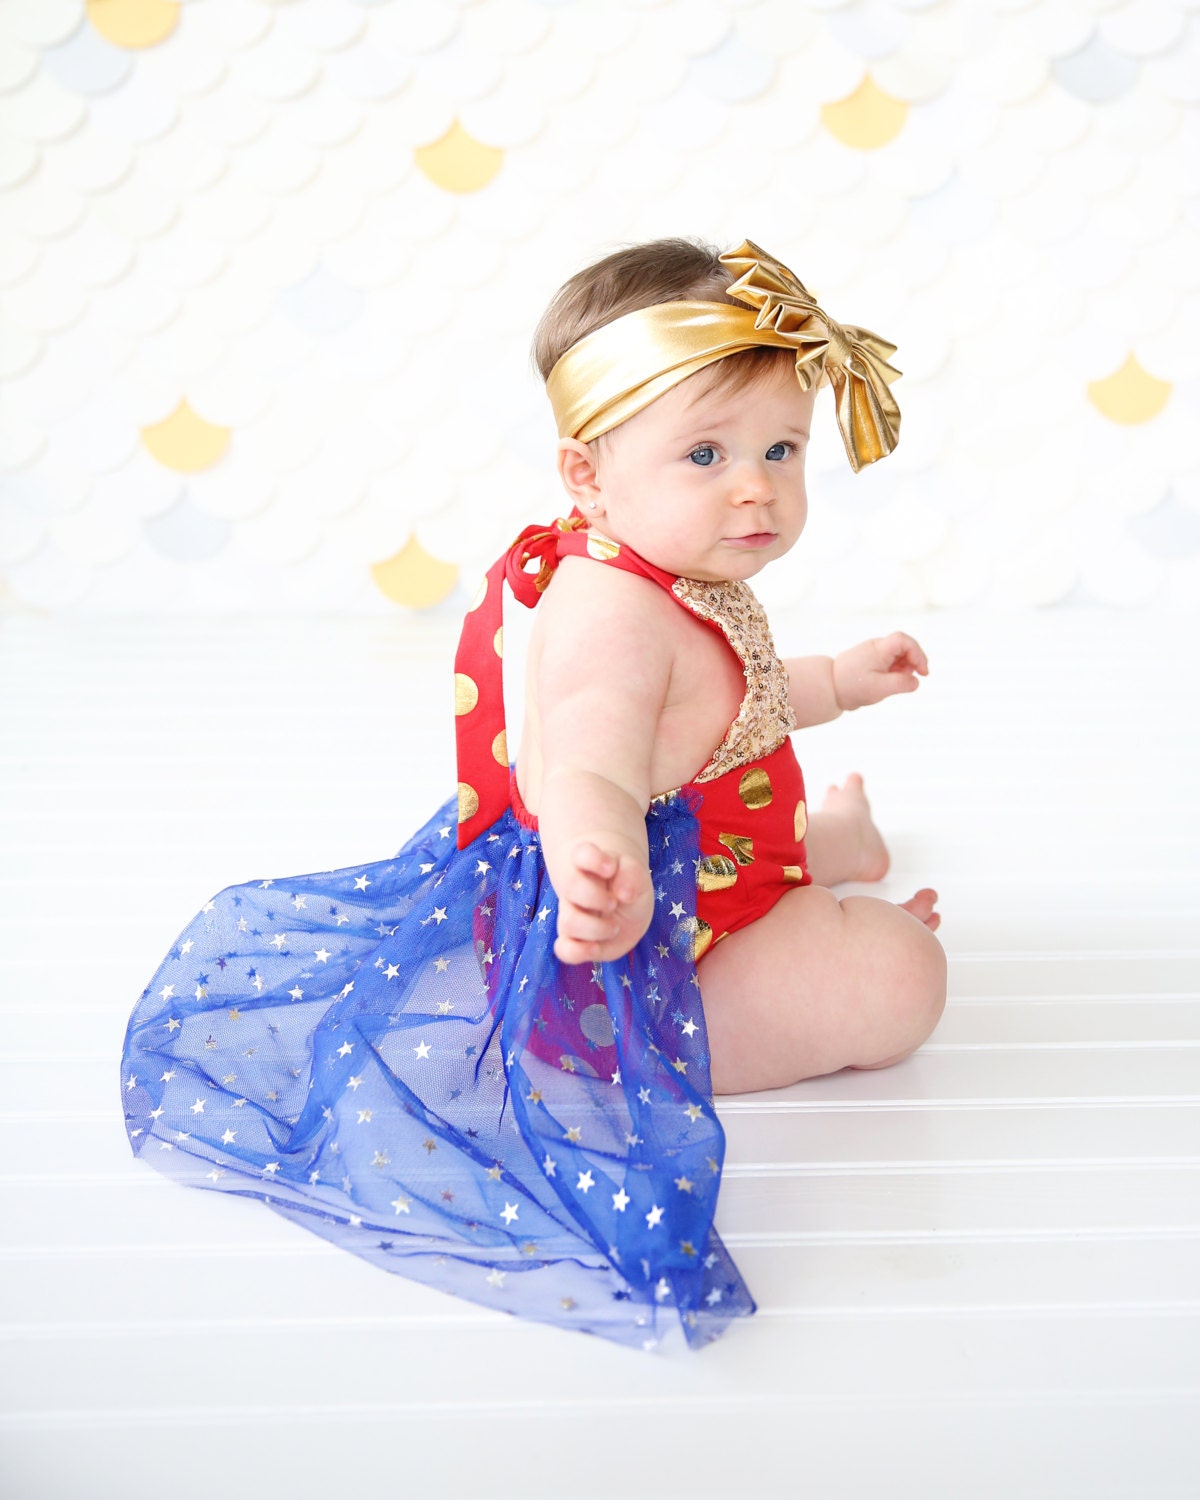 Romper - Tulle skirted, Skirted, Sequin Top Romper - Sequin Romper - Princess - Birthday Romper - Photoshoot - Red, Blue and Gold Romper